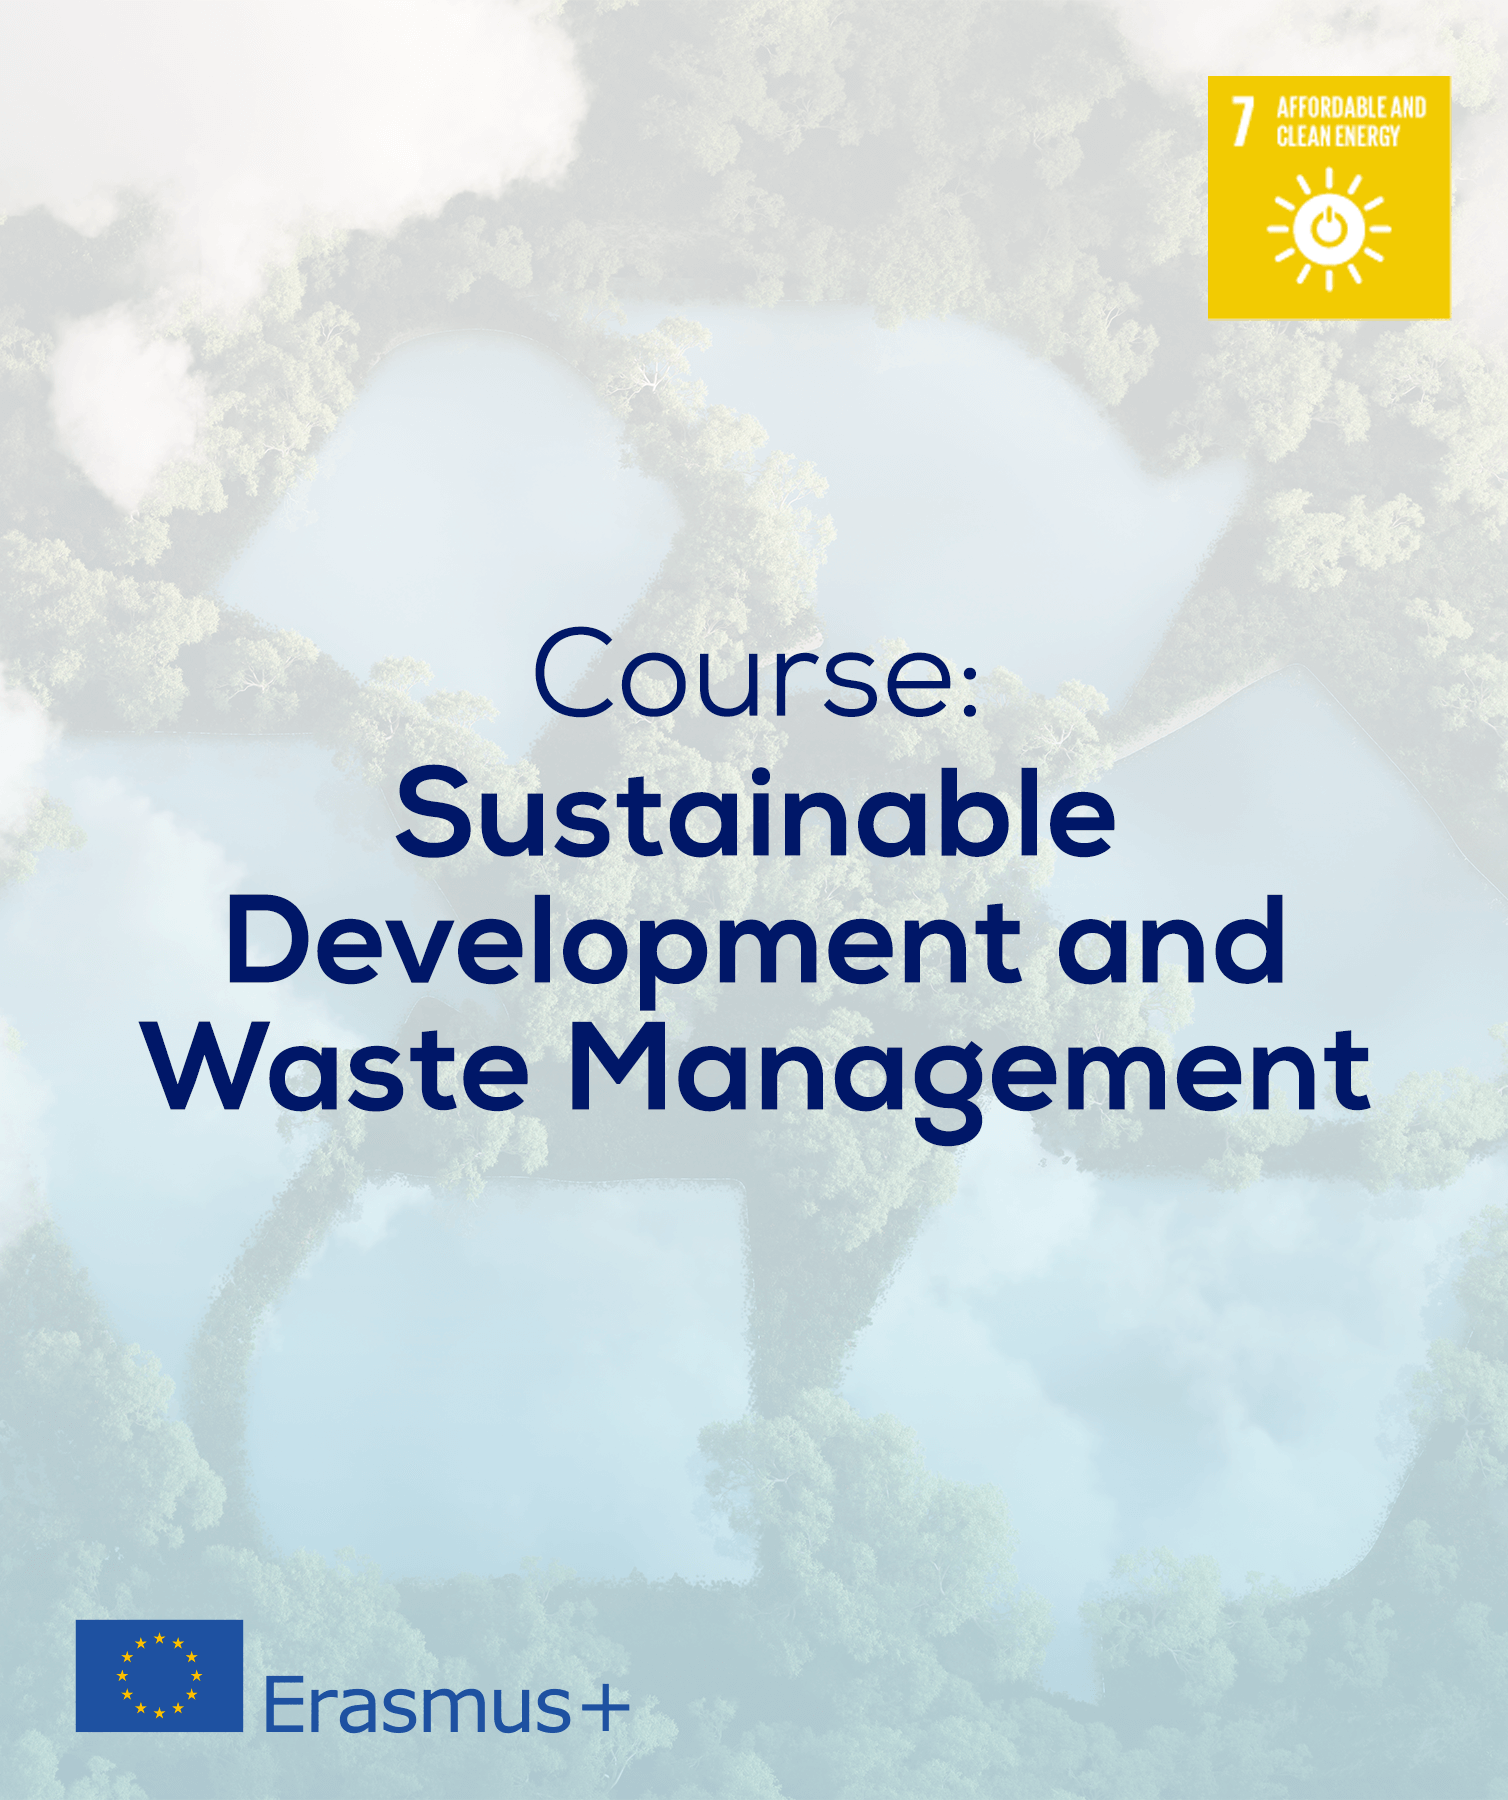 Course: Sustainable Development and Waste Management